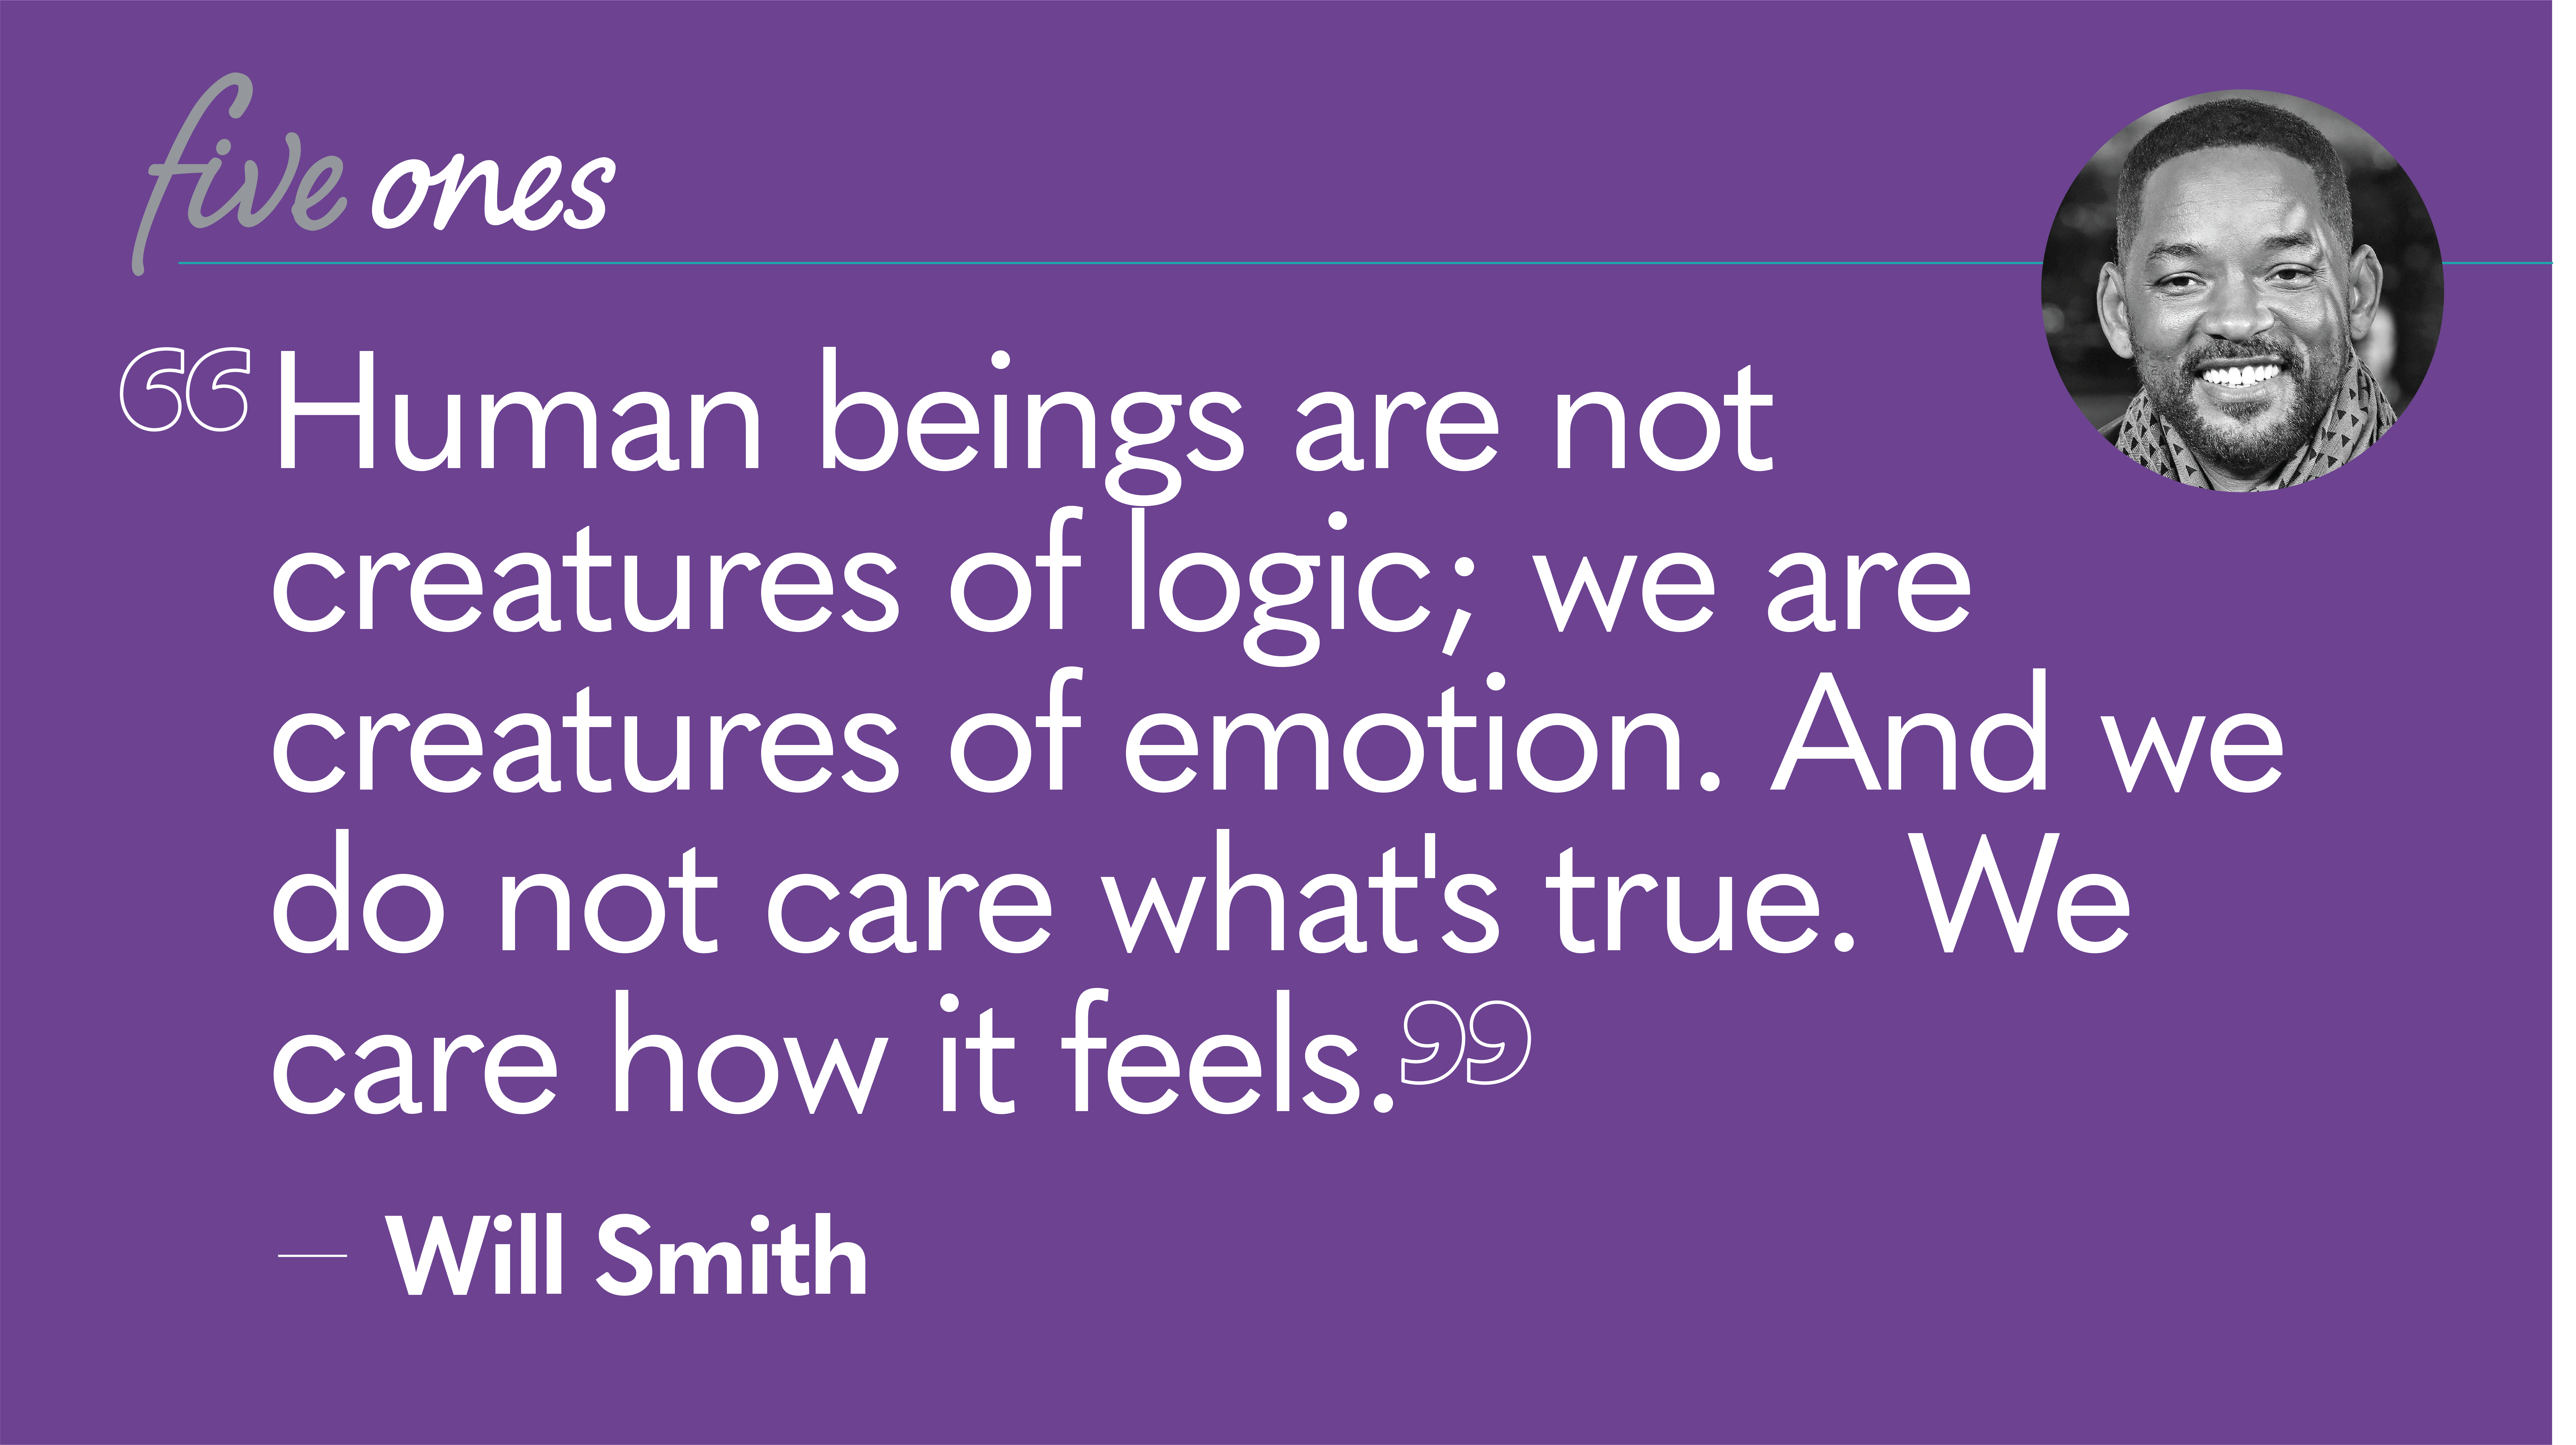 Will Smith logic vs emotion quote